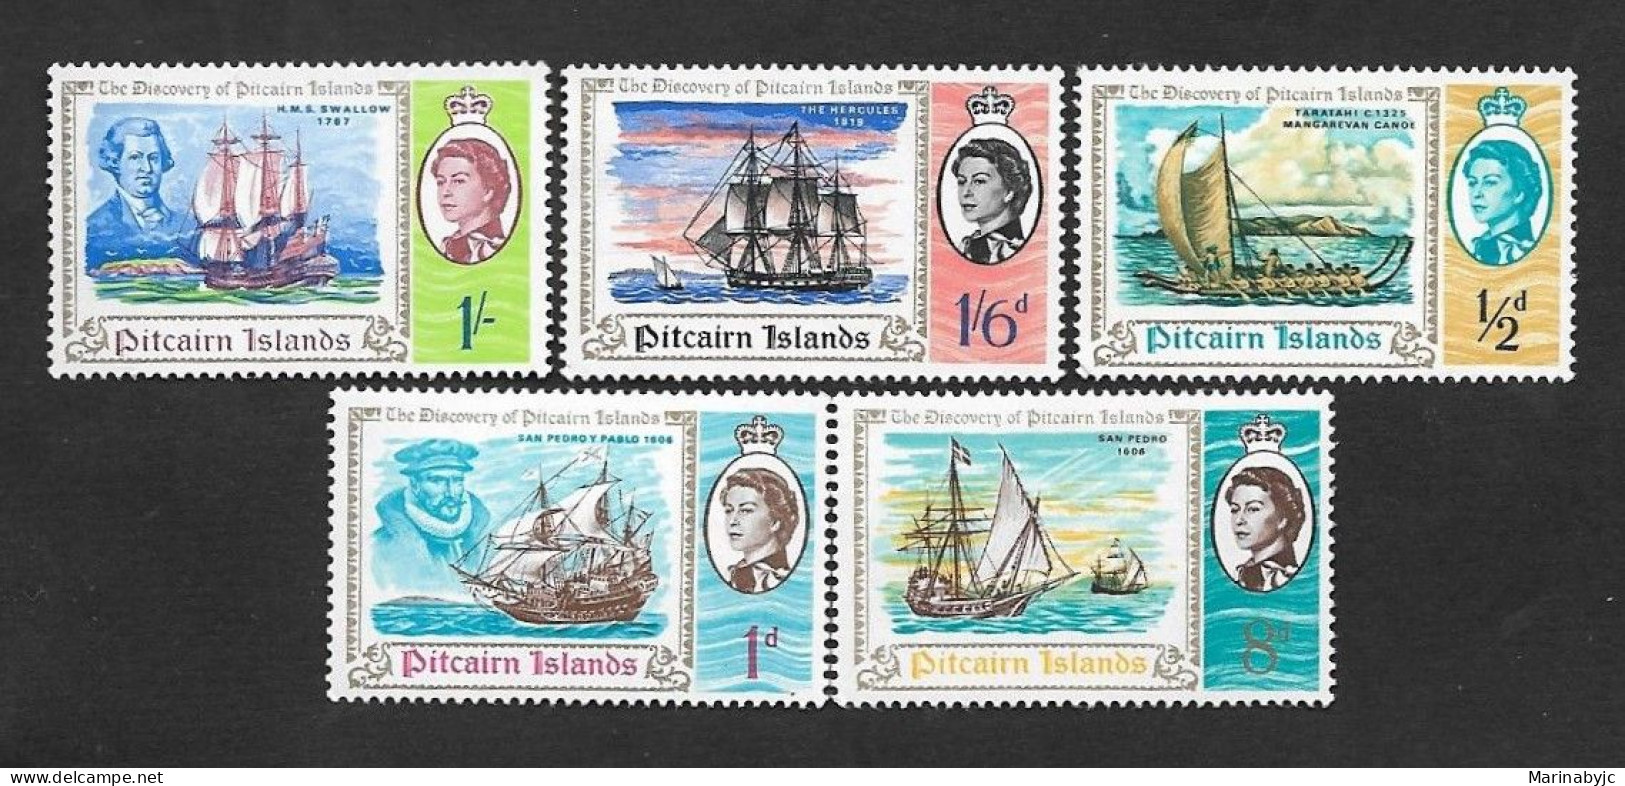 SE)1967 PITCAIRN ISLANDS, BICENTENARY OF THE DISCOVERY OF THE ISLAND BY CAPTAIN PHILIP CARTERET 5 MNH STAMPS - Sonstige - Ozeanien